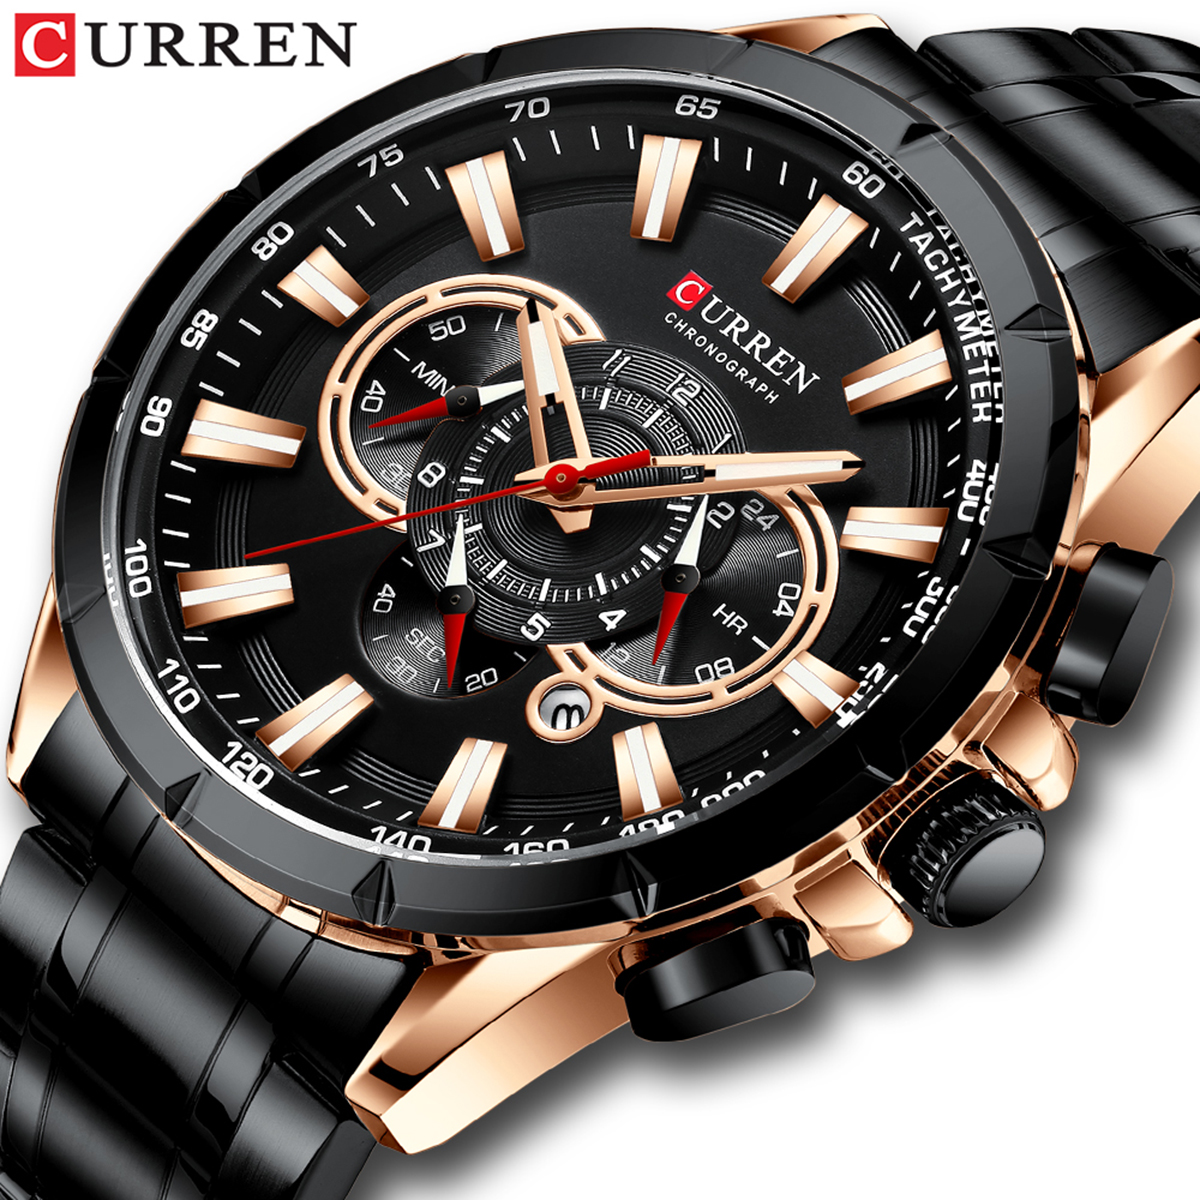 CURREN 8363 Watch for Male Men Quartz Man Wristwatch Watches with Stainless Steel Strap Band Three Sub-Dials Second Minute Microsecond Chronograph Date Calendar Indicator Waterproof Luminous Hands Wea - image 4 of 7